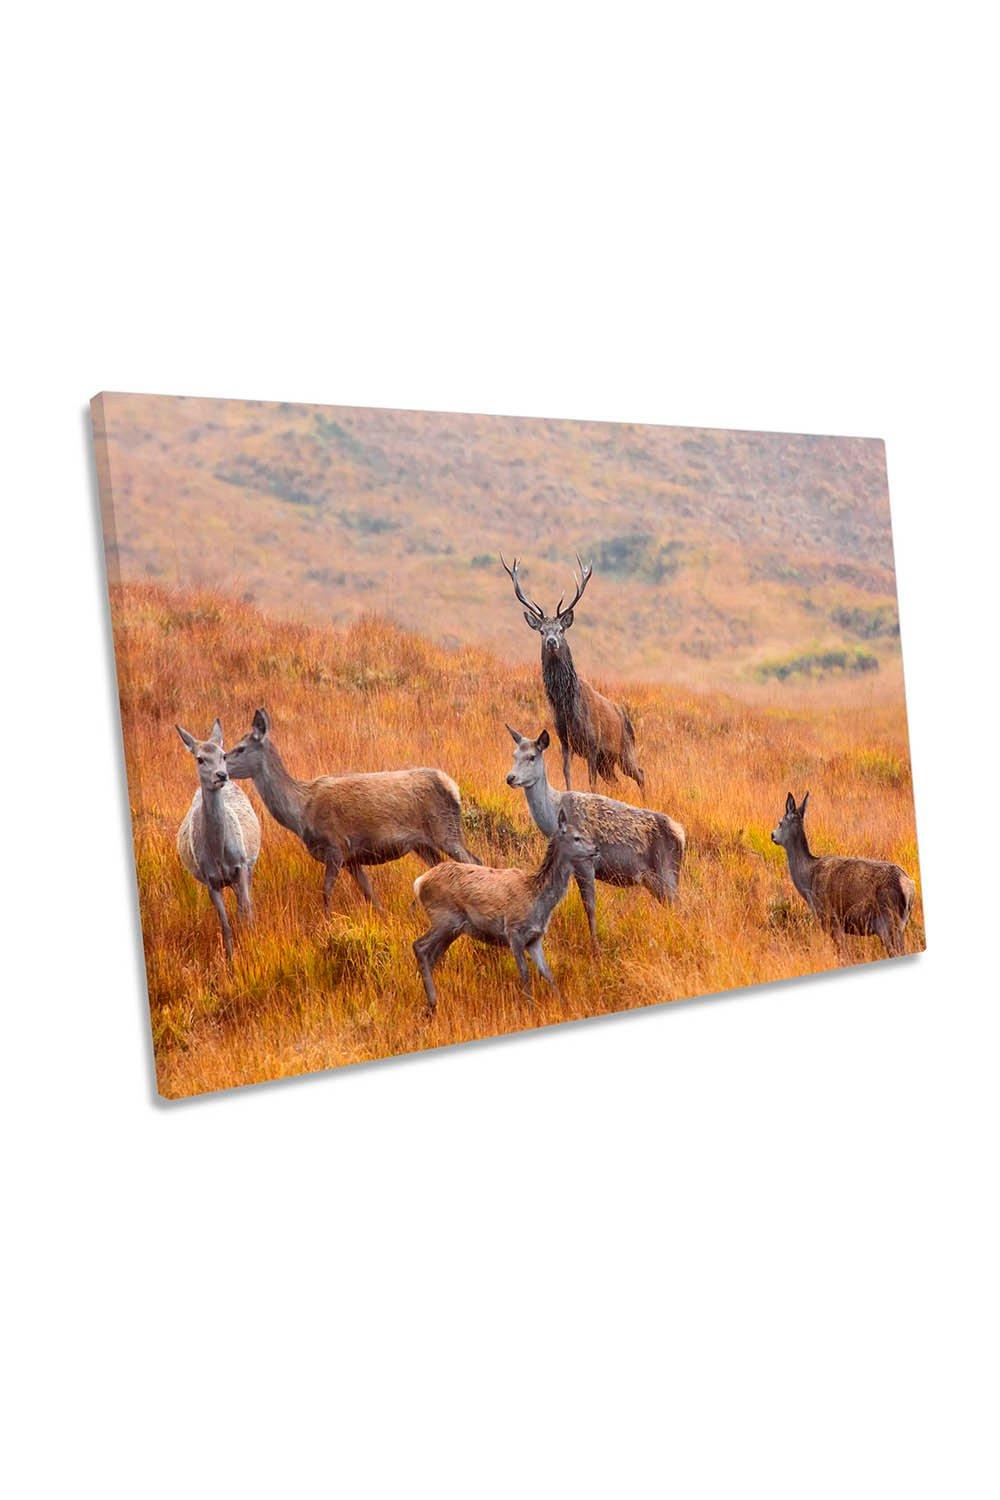 Guardian of the Moorland Stag Deer Canvas Wall Art Picture Print